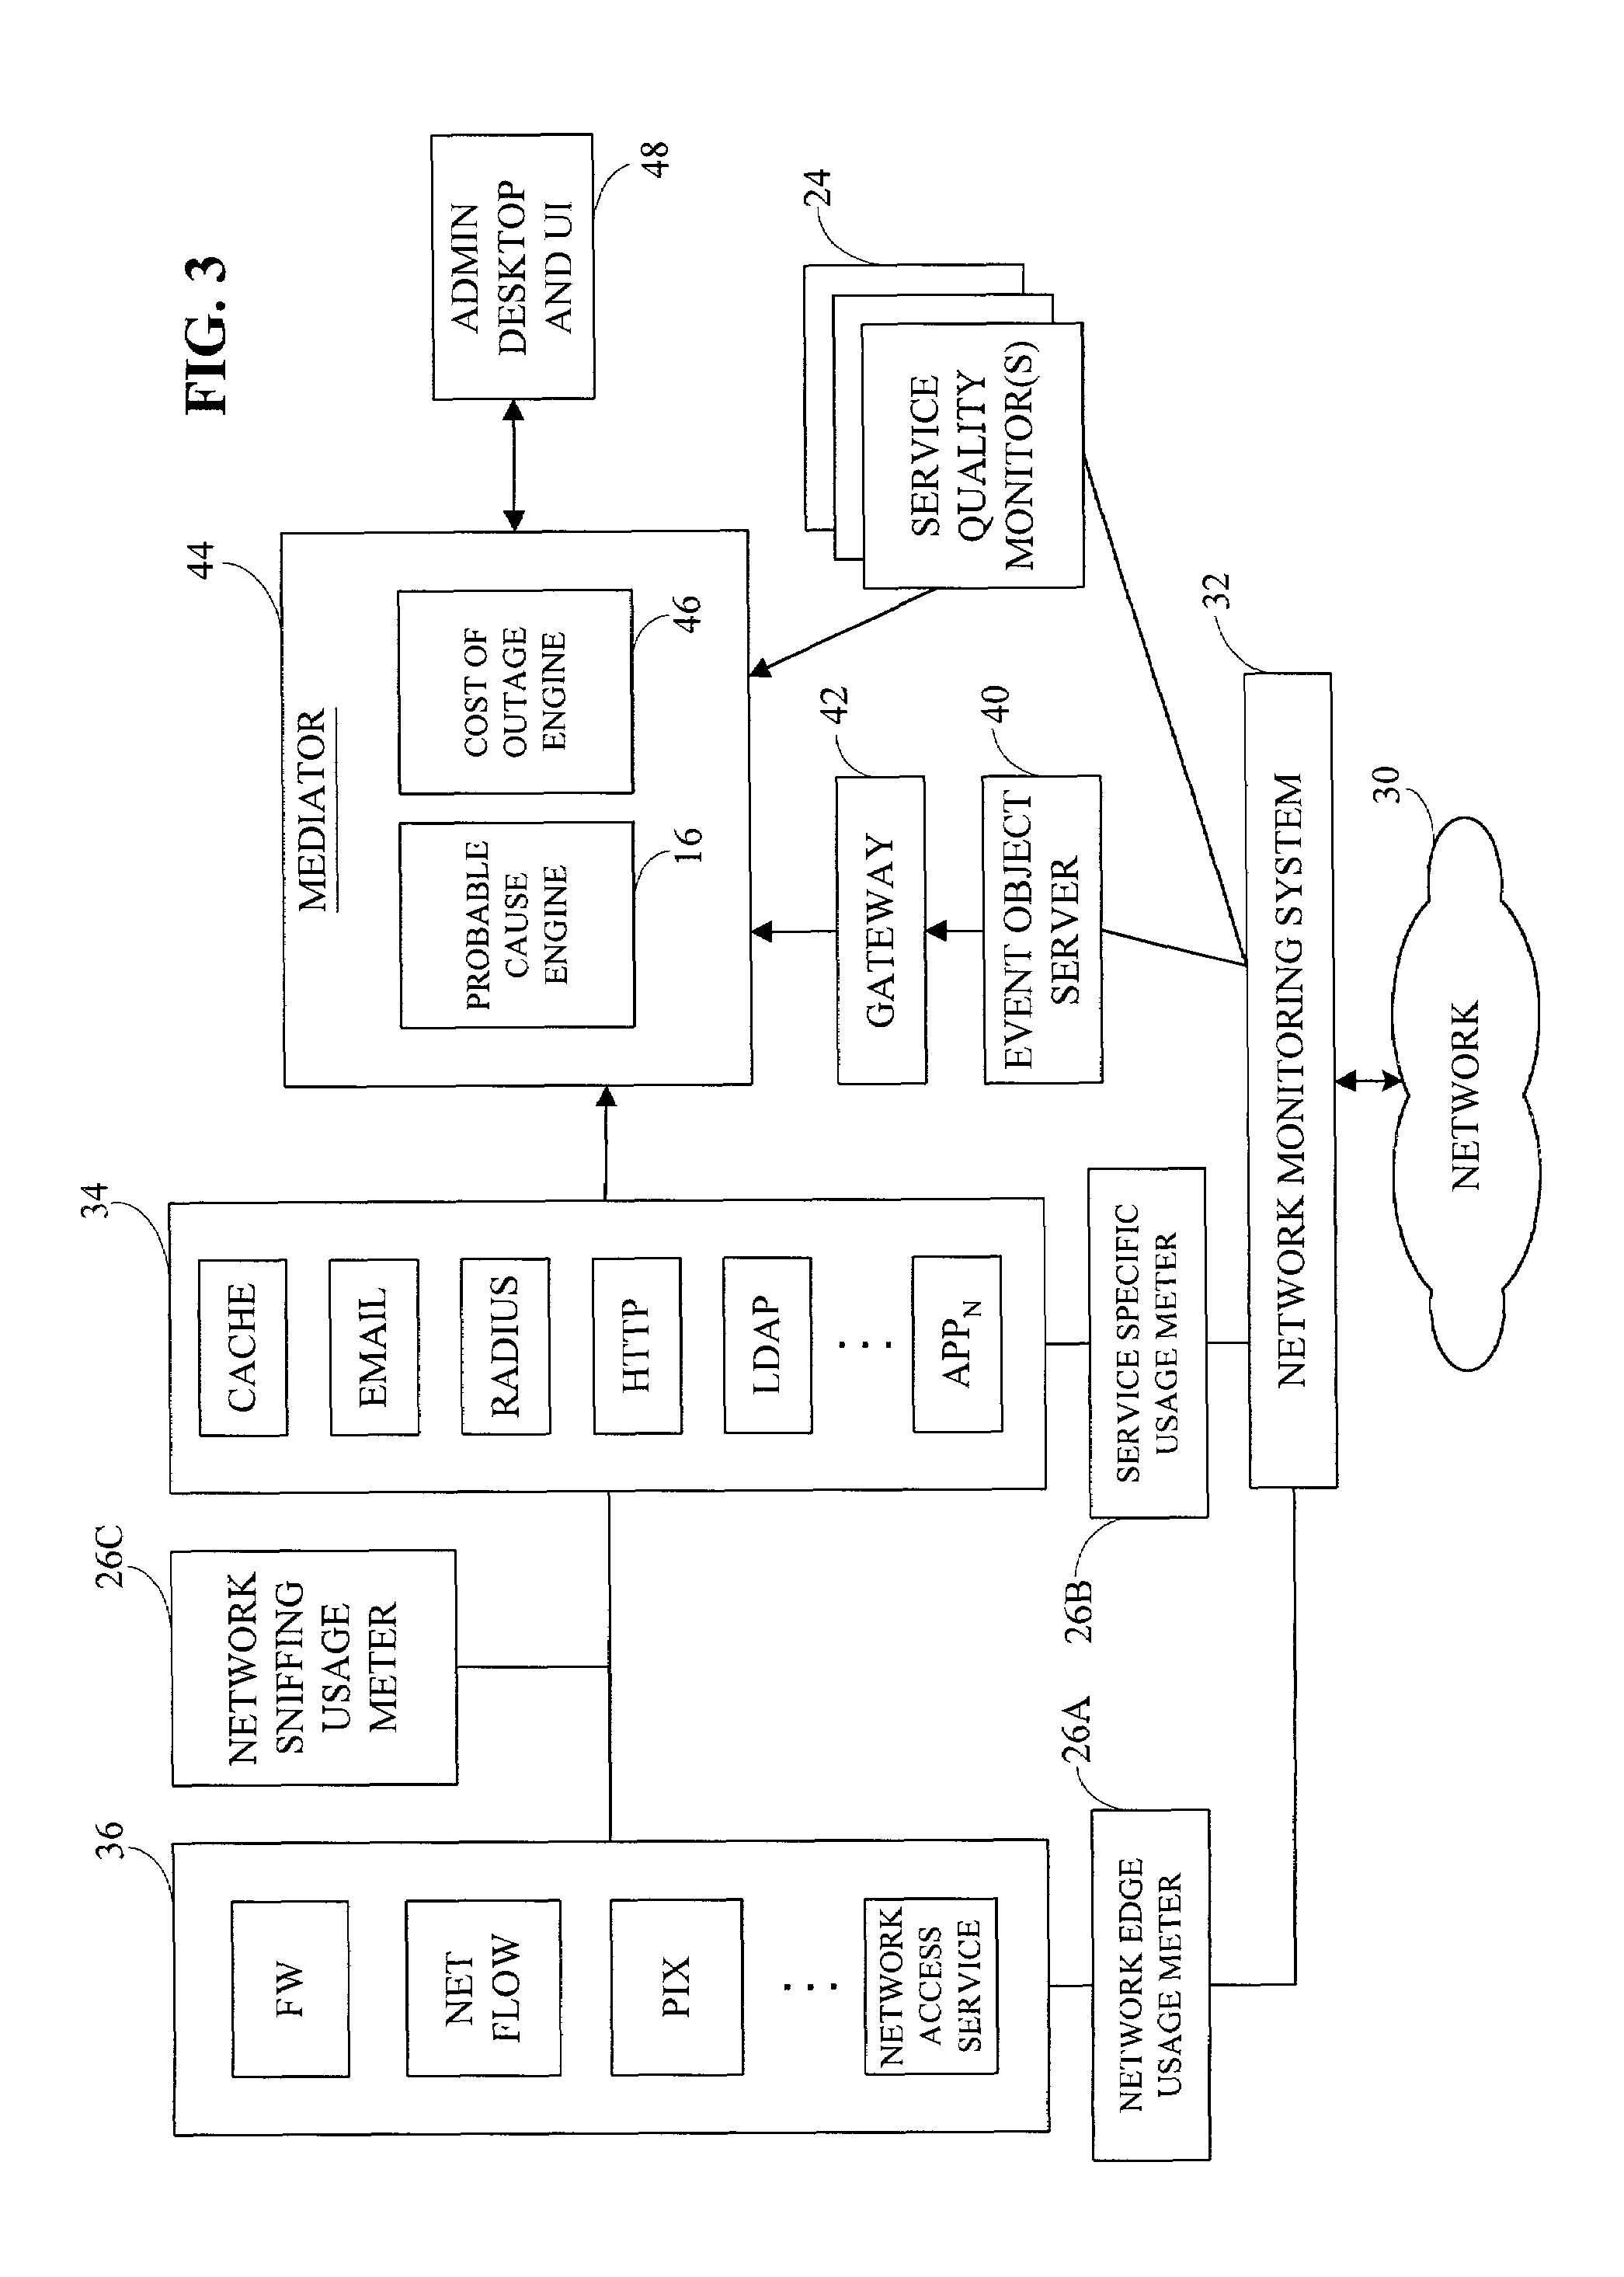 Method and system for predicting causes of network service outages using time domain correlation